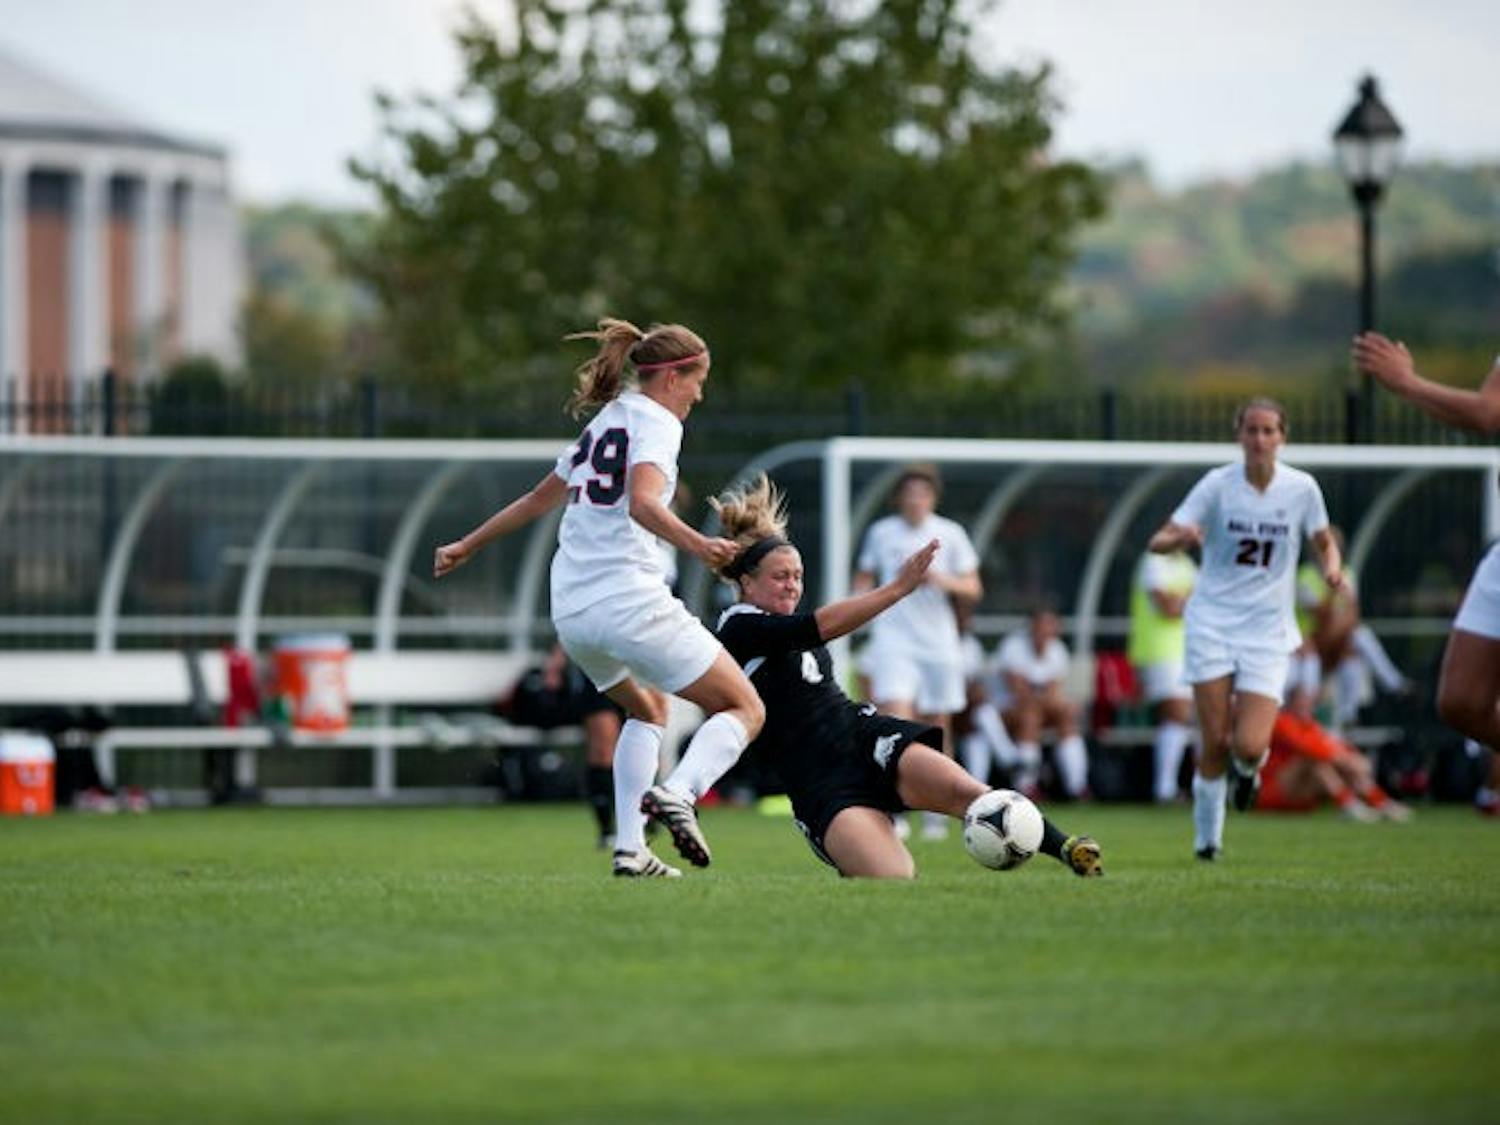 Soccer: Bobcats can't finish chances, lose to Eastern Michigan  